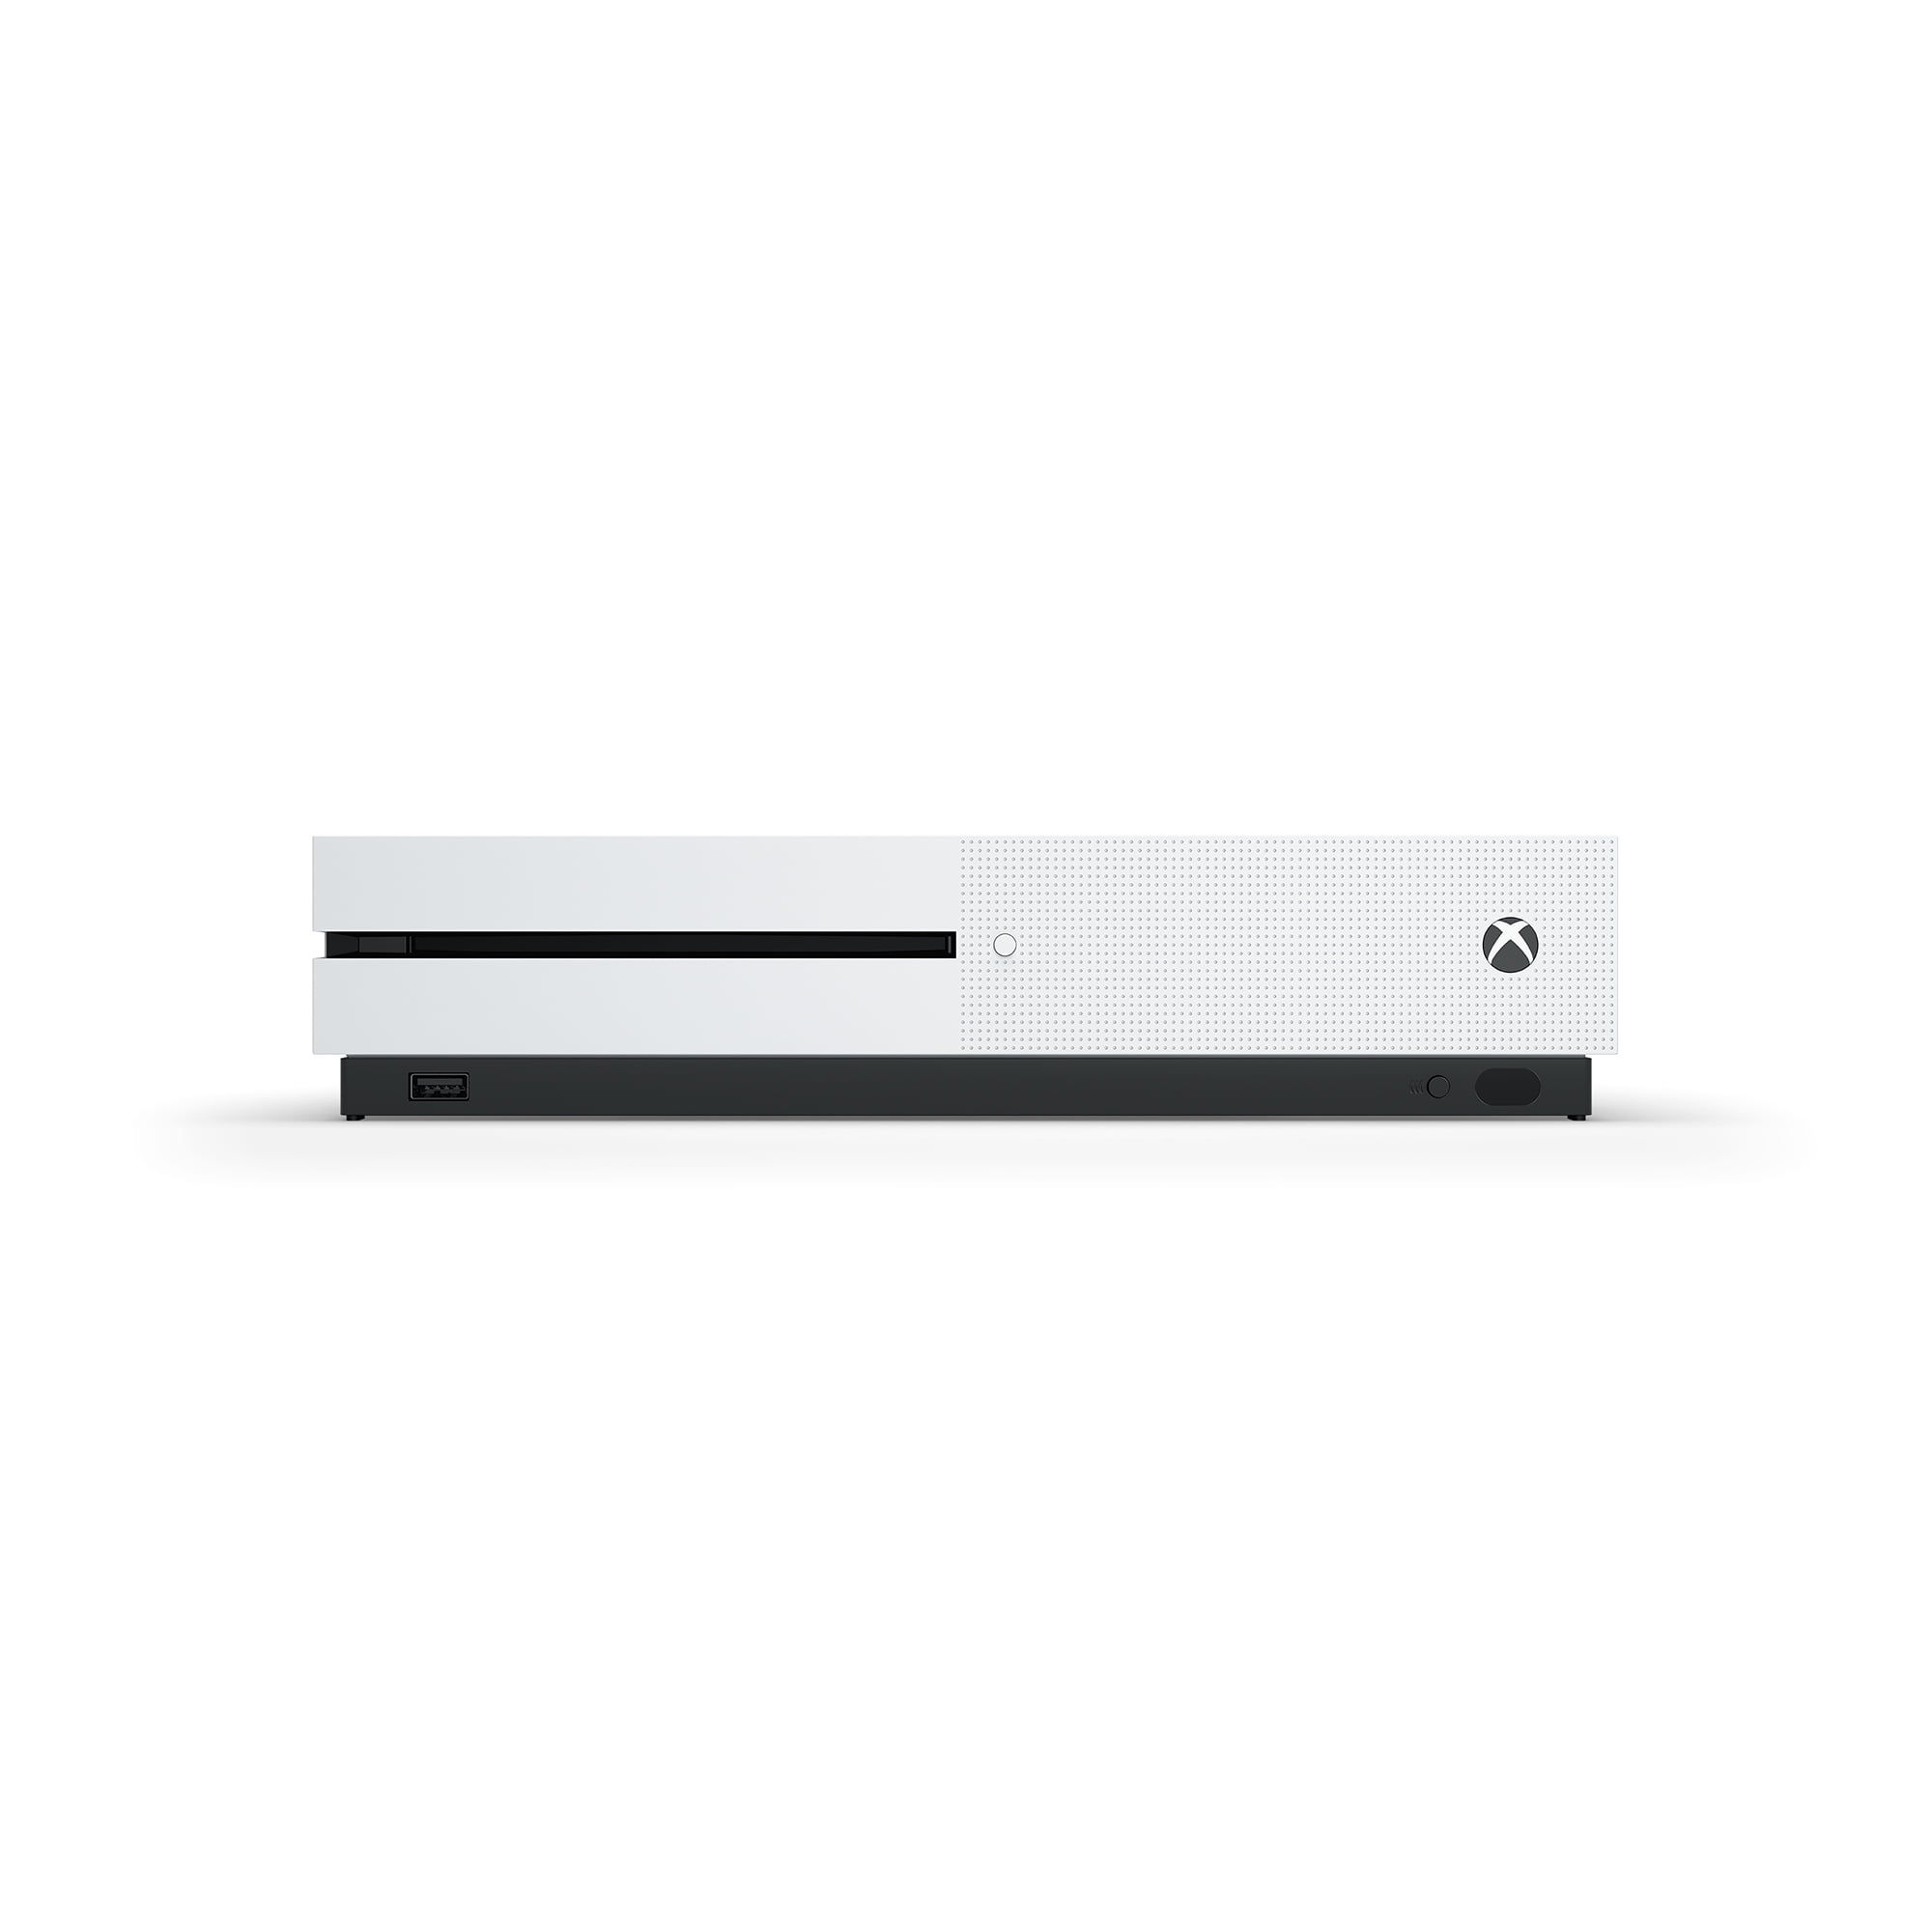 Xbox One S - 500GB, White  Fabricating and Metalworking